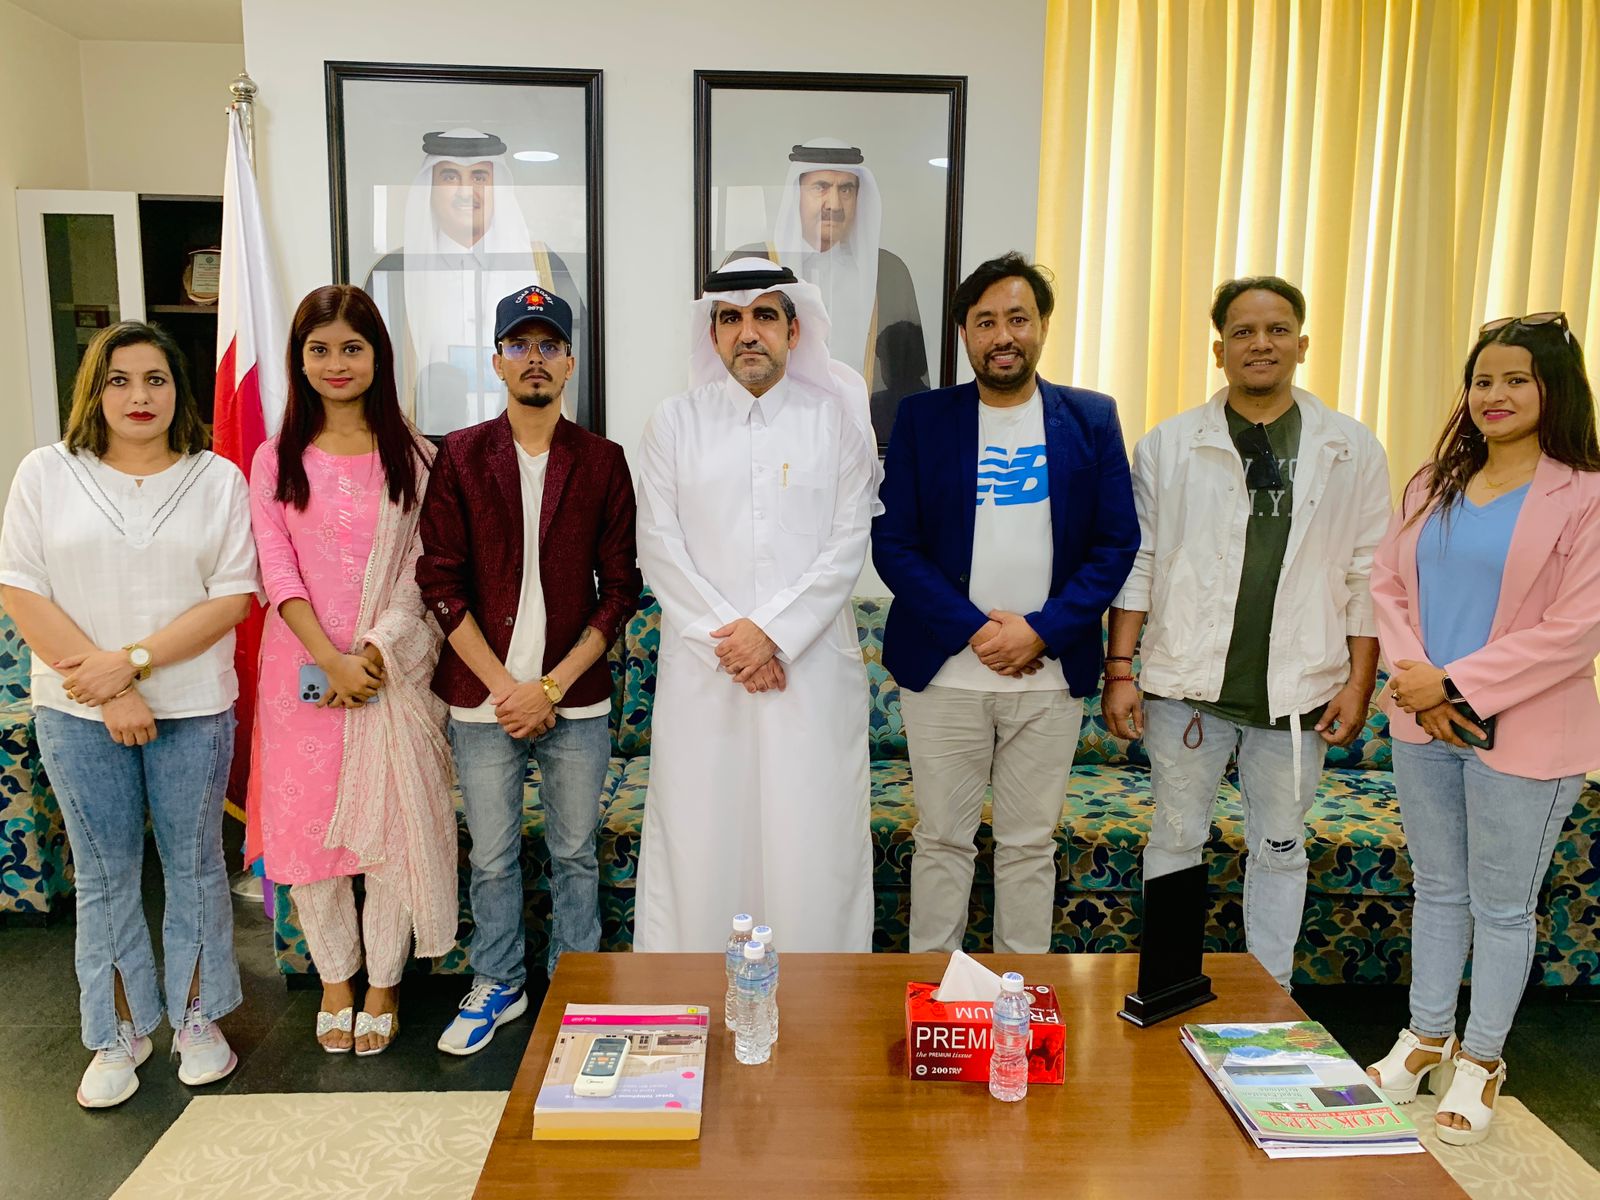 Discussion on Arabic and Nepali Music with Qatar's ambassador